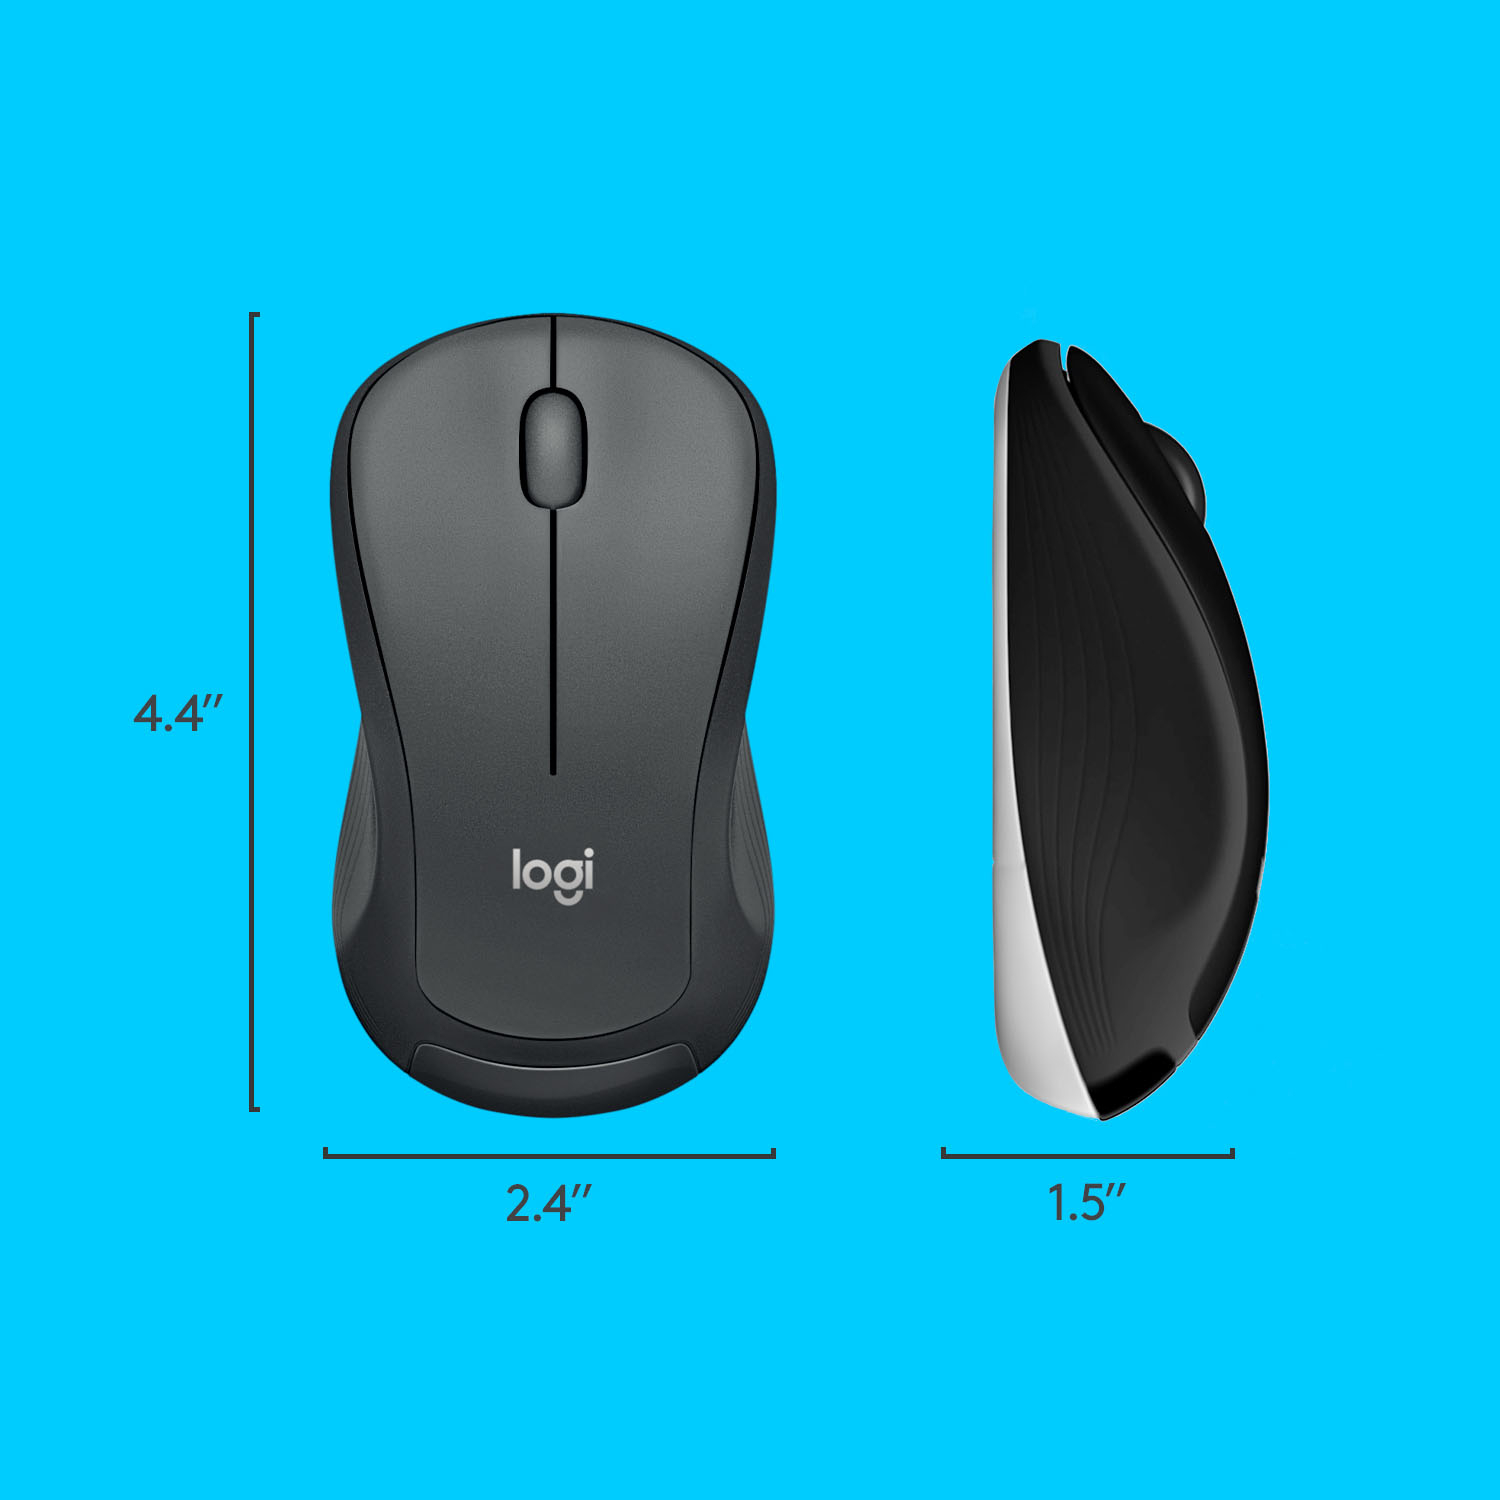 Keyboard Advanced PC - Best Wireless Full-size Combo Buy Membrane Logitech MK540 920-008671 and Mouse for Black